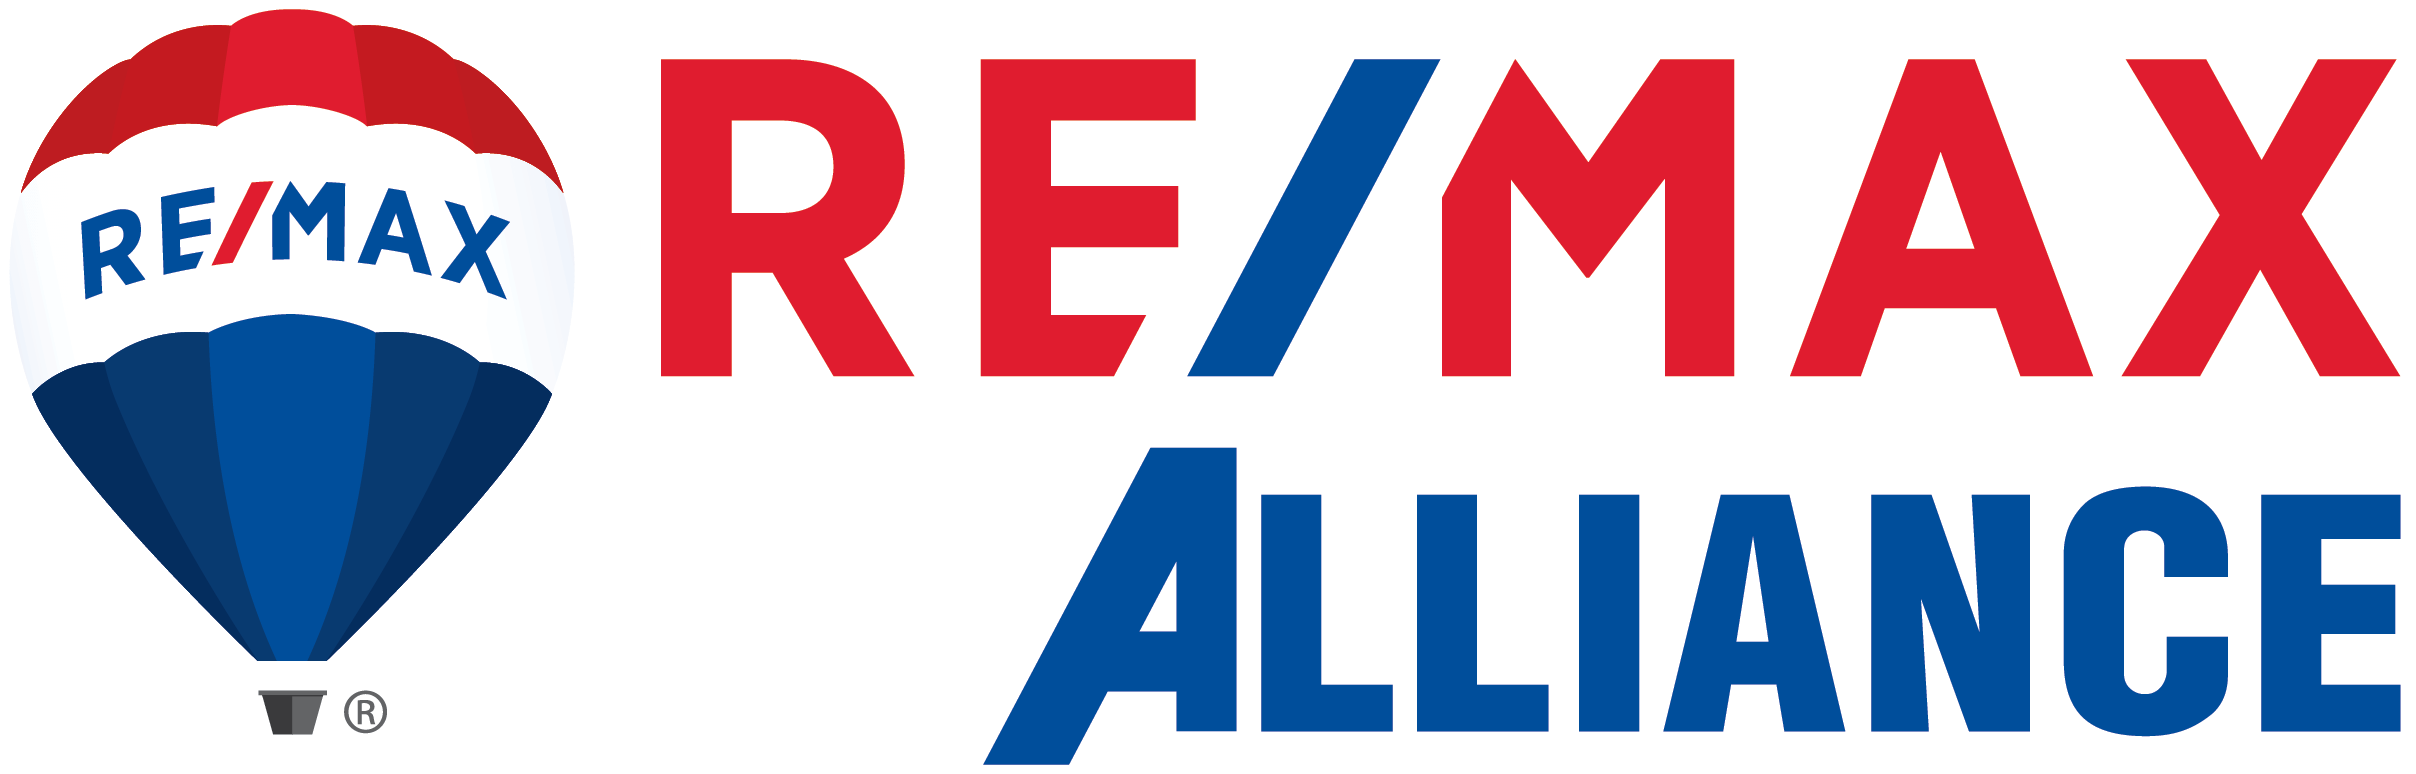 remax-alliance-with-balloon-white-outline.png